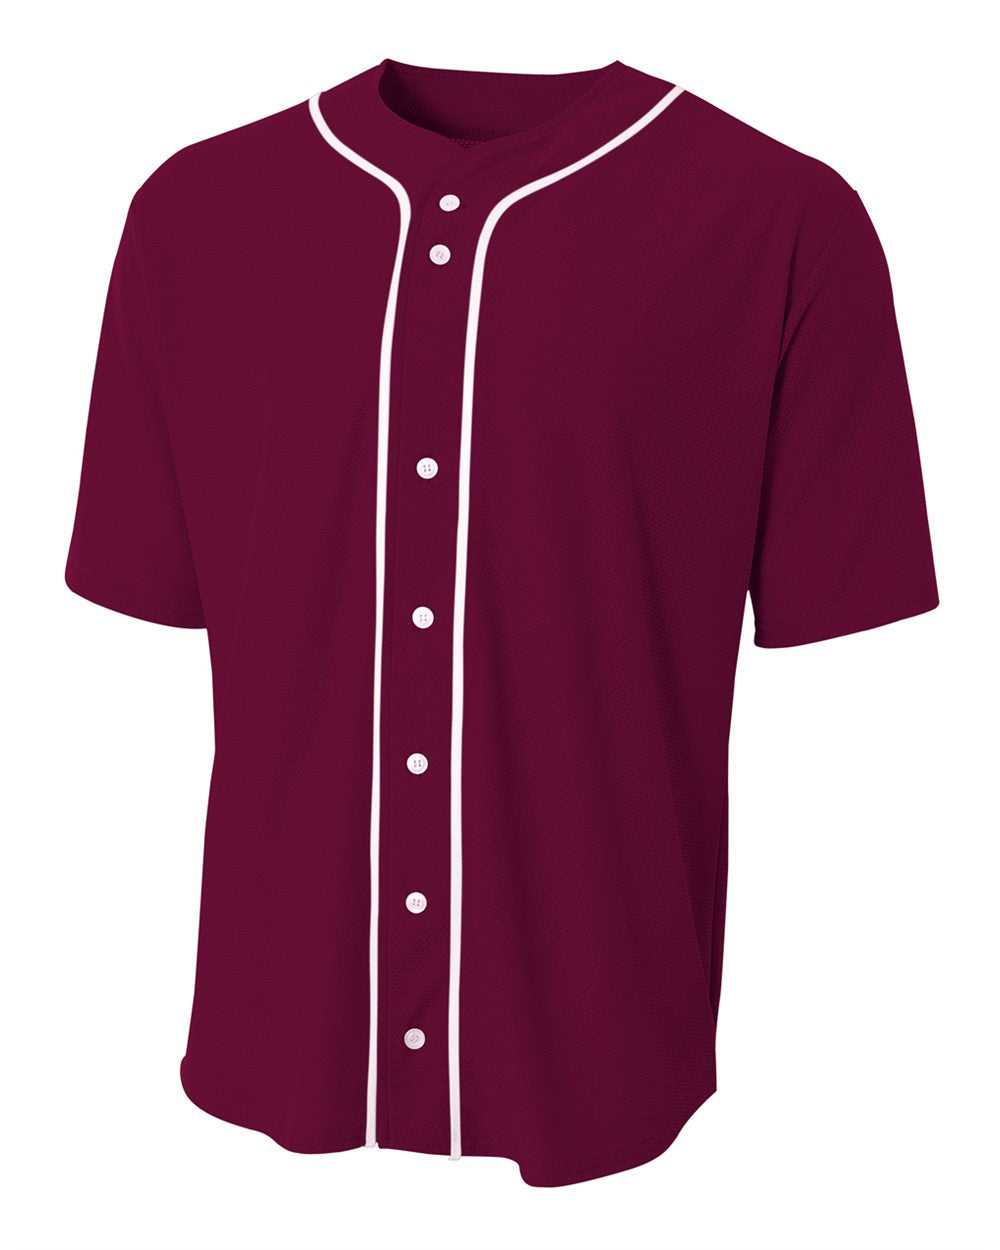 A4 NB4184 Youth Full Button Stretch Mesh Baseball Jersey - Maroon White - HIT a Double